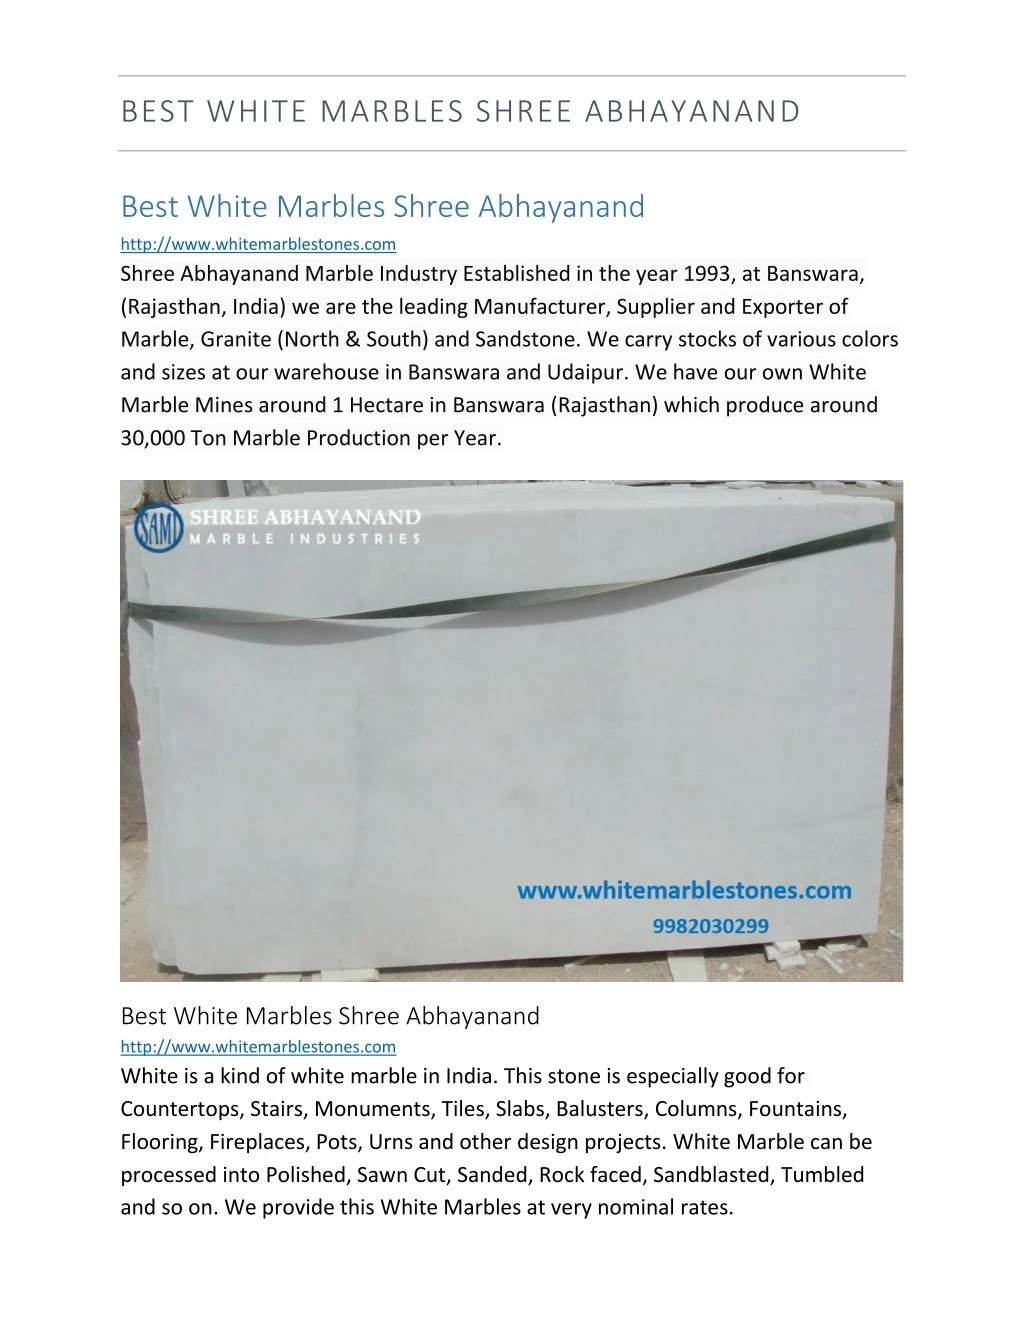 best white marbles shree abhayanand